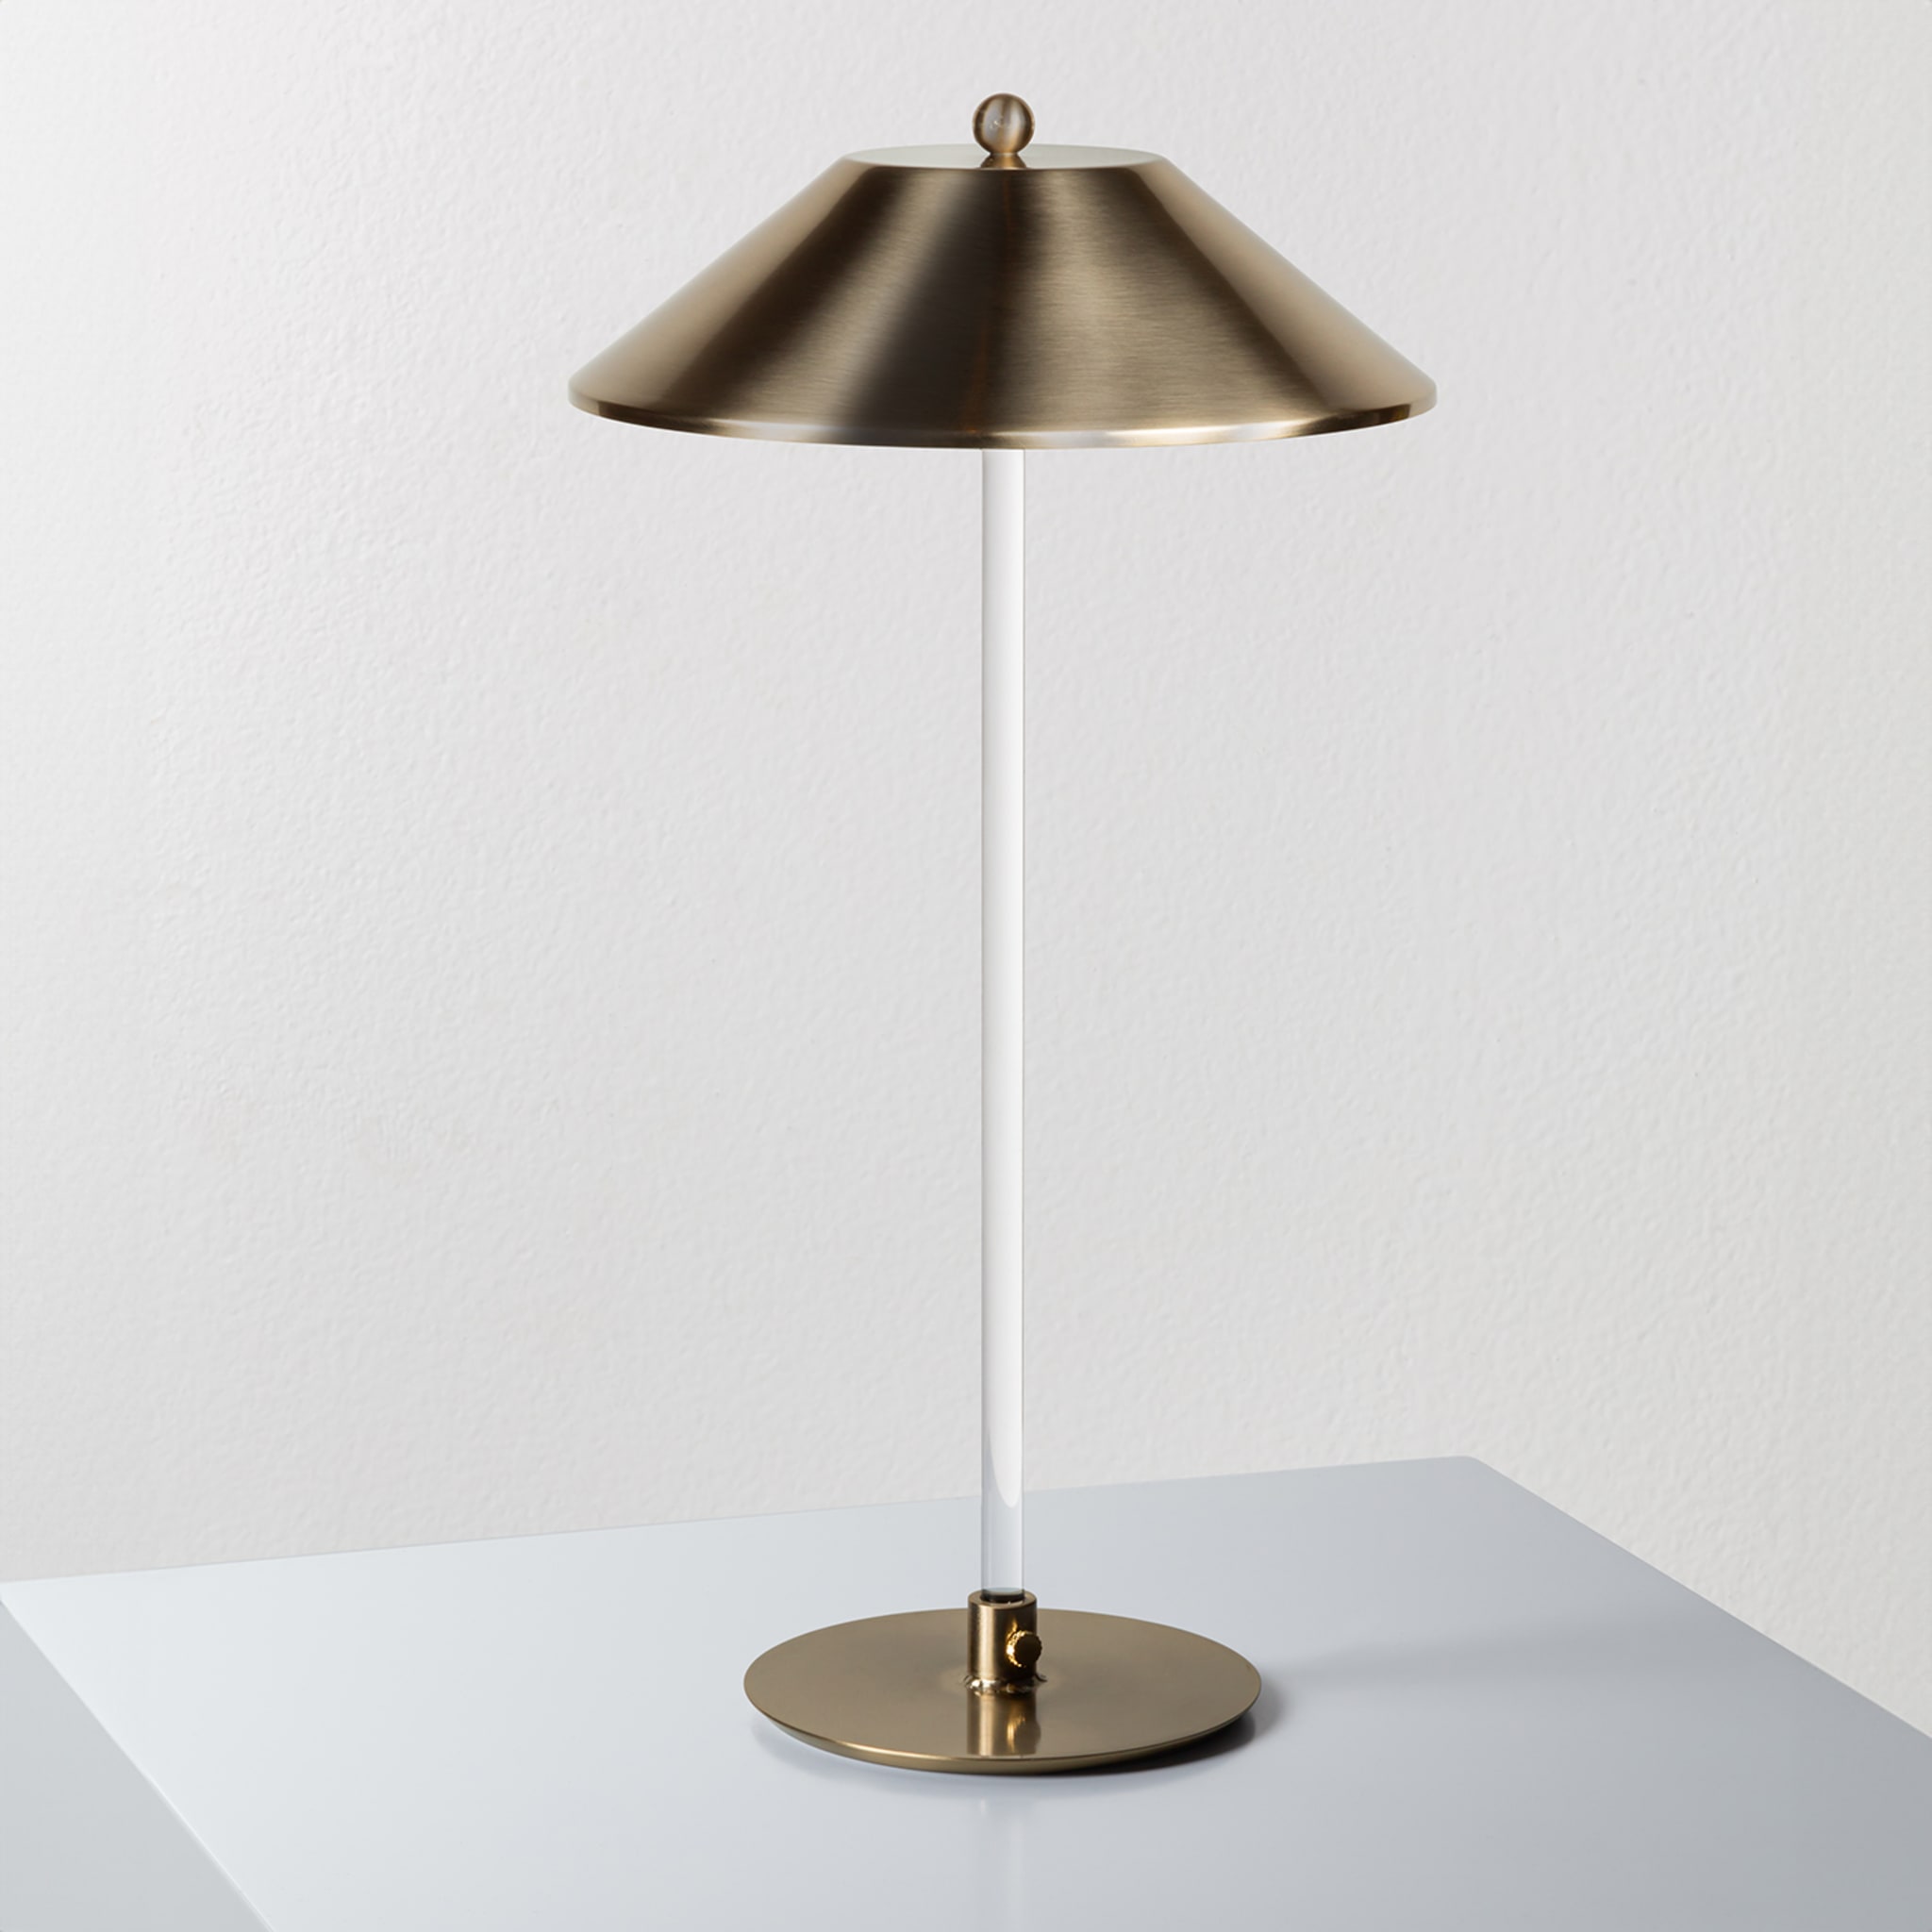 Candilee Champagne Table Lamp by Isacco Brioschi - Alternative view 1